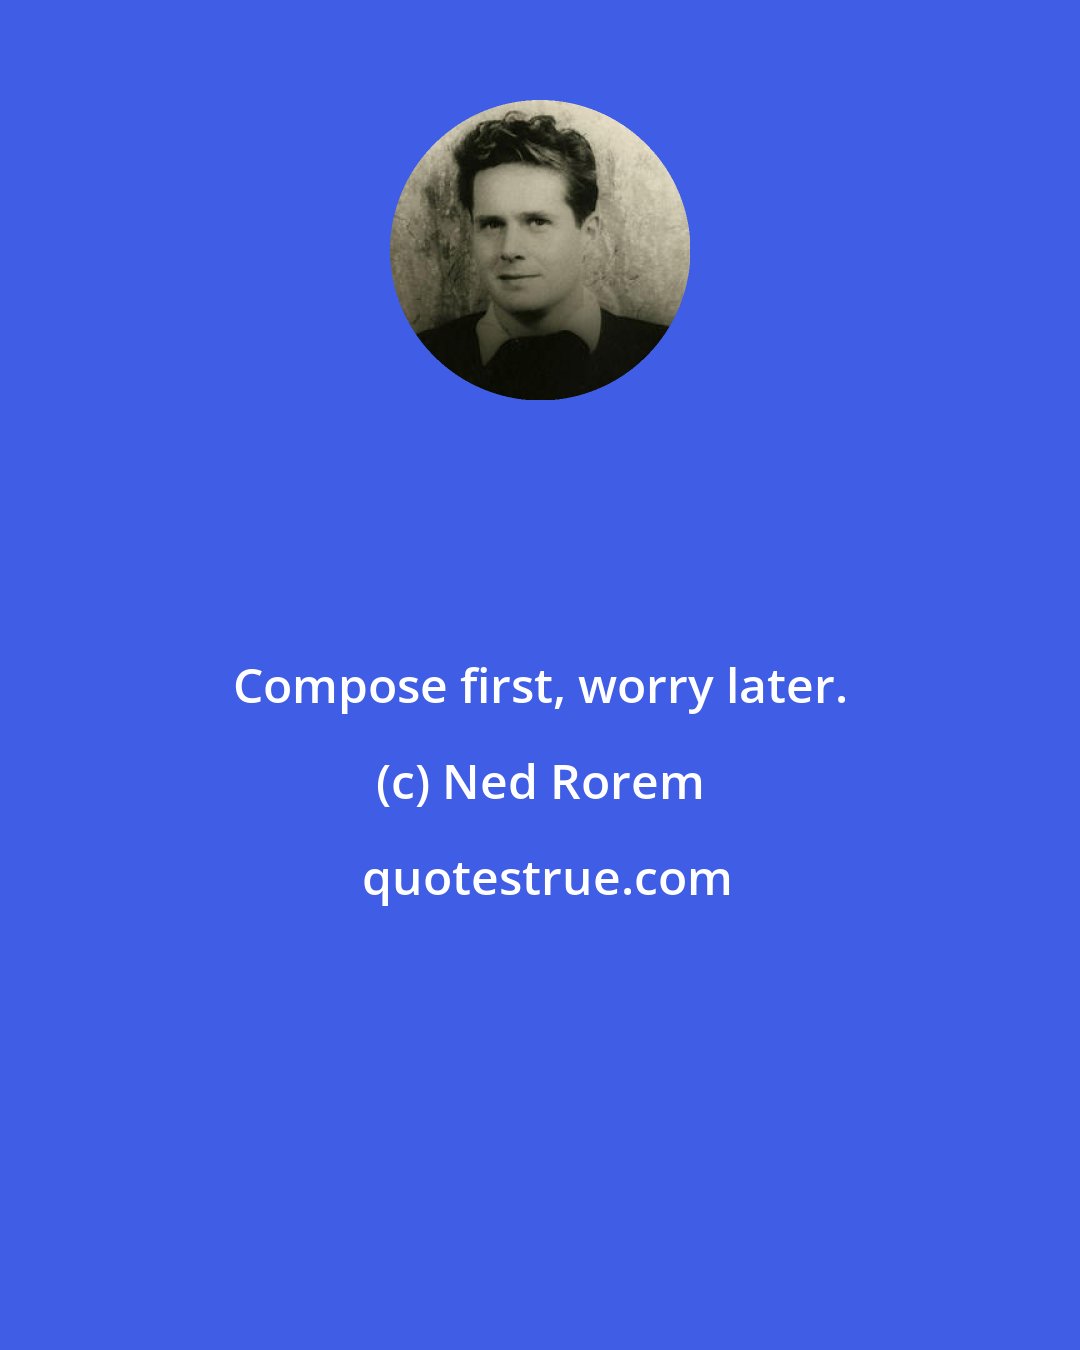 Ned Rorem: Compose first, worry later.